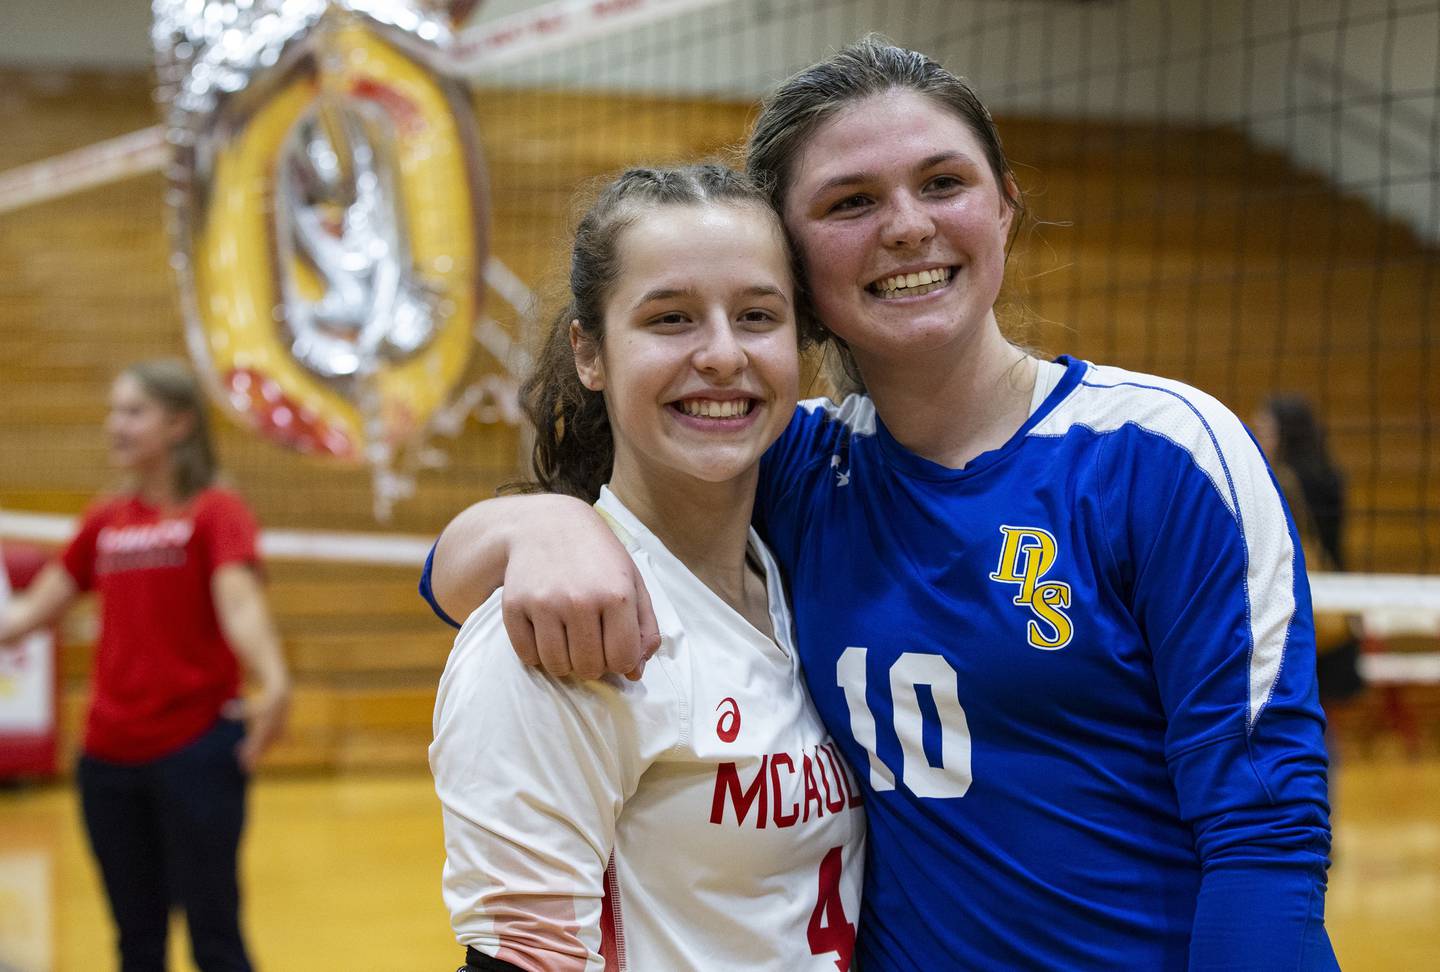 Mother McAuley's Sam Falk (4) and De La Salle's Jennifer Falk (10), who are cousins, hug after playing against each other in a GCAC Red match in Chicago on Tuesday, Oct. 11, 2022.